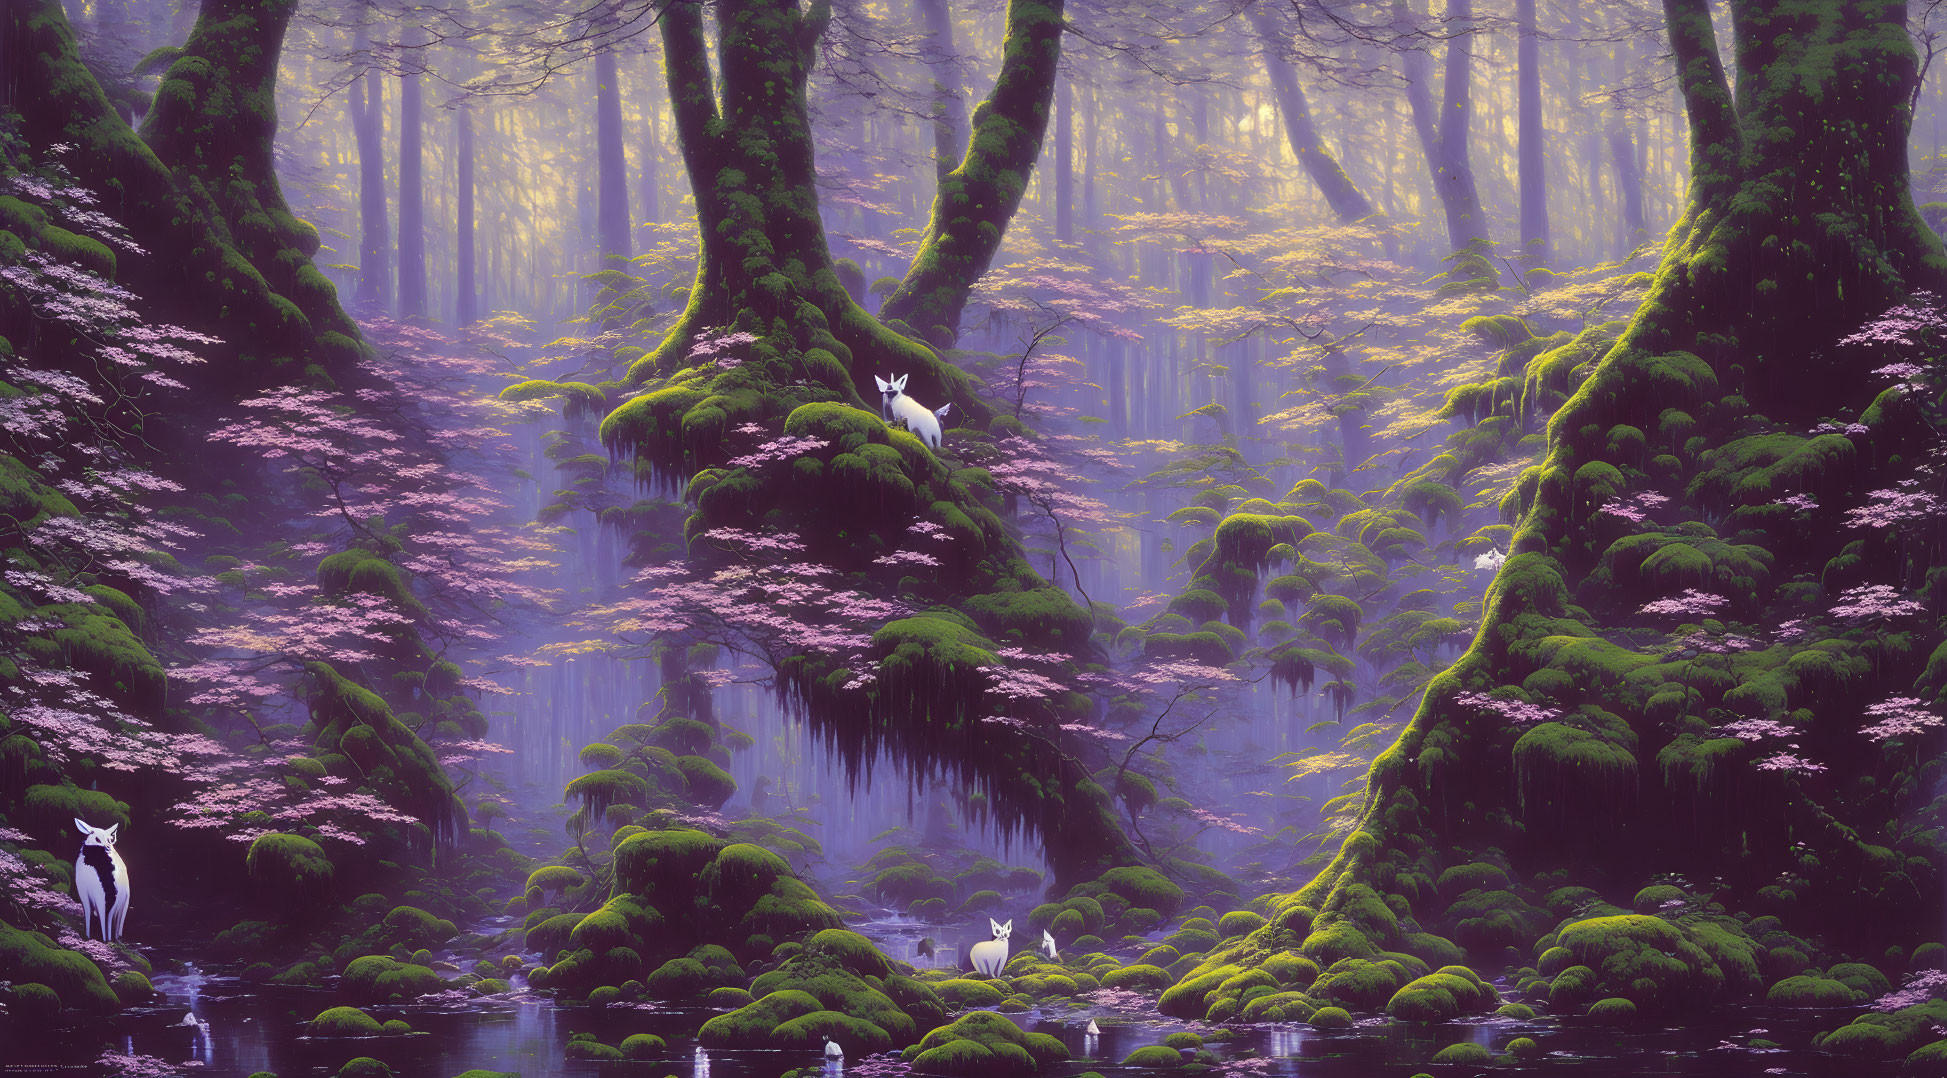 Tranquil forest scene with moss-covered trees, pink blossoms, white deer, and ethereal